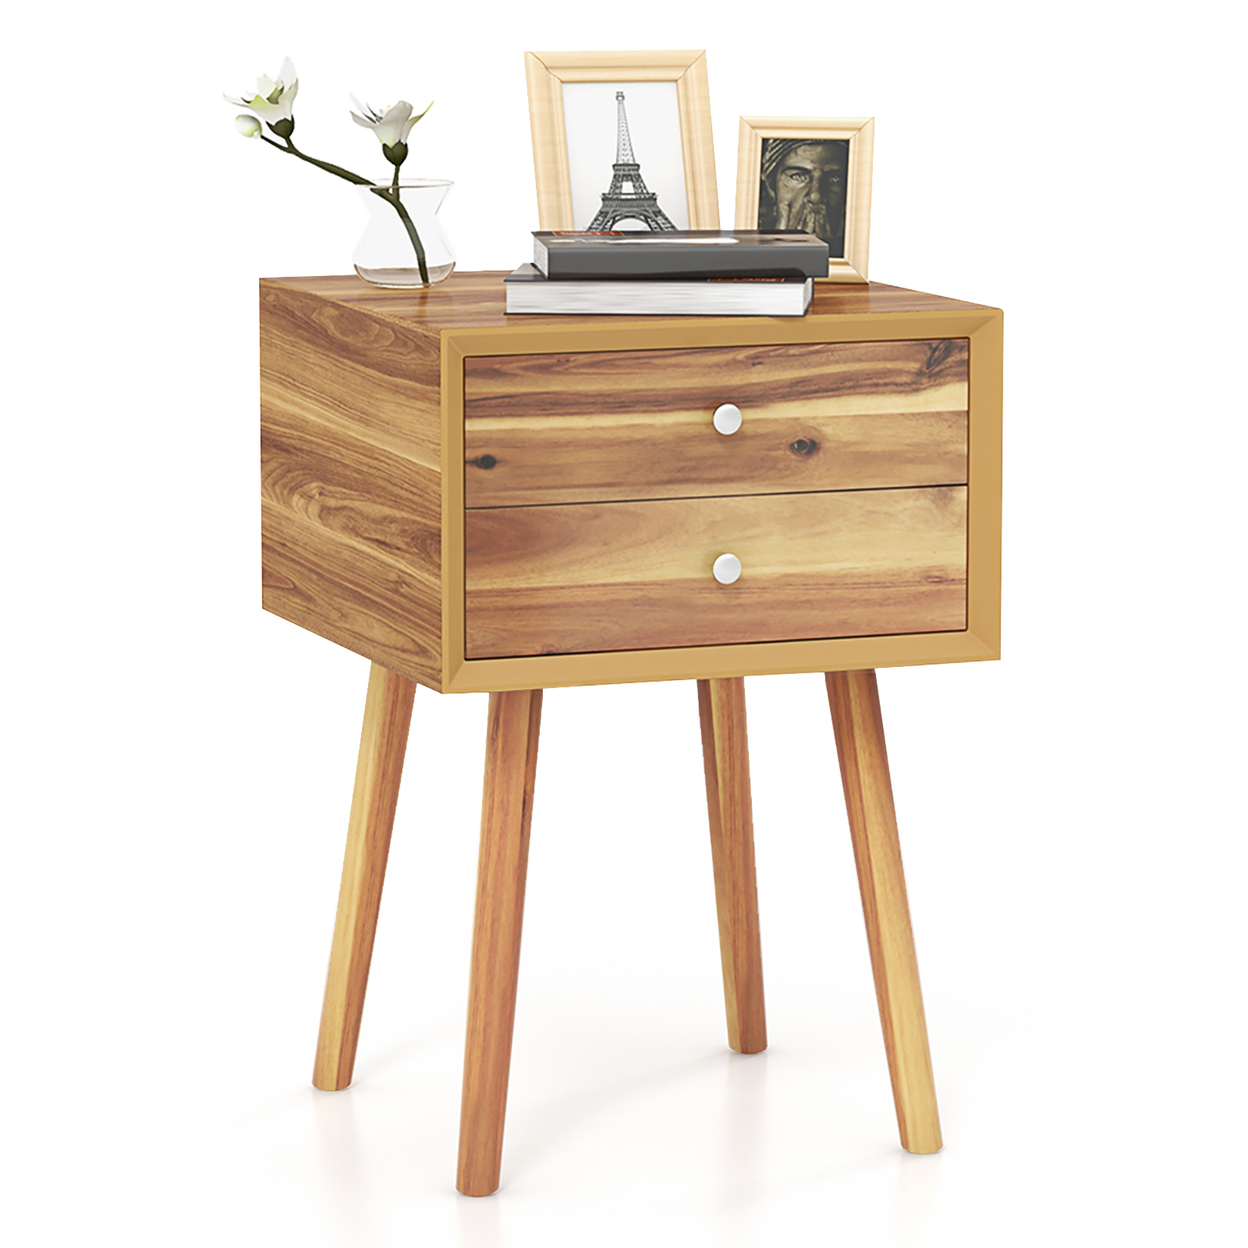 2-Drawer Nightstand Mid-century Modern Bed Side Table W/ Storage Multipurpose End Table Brown